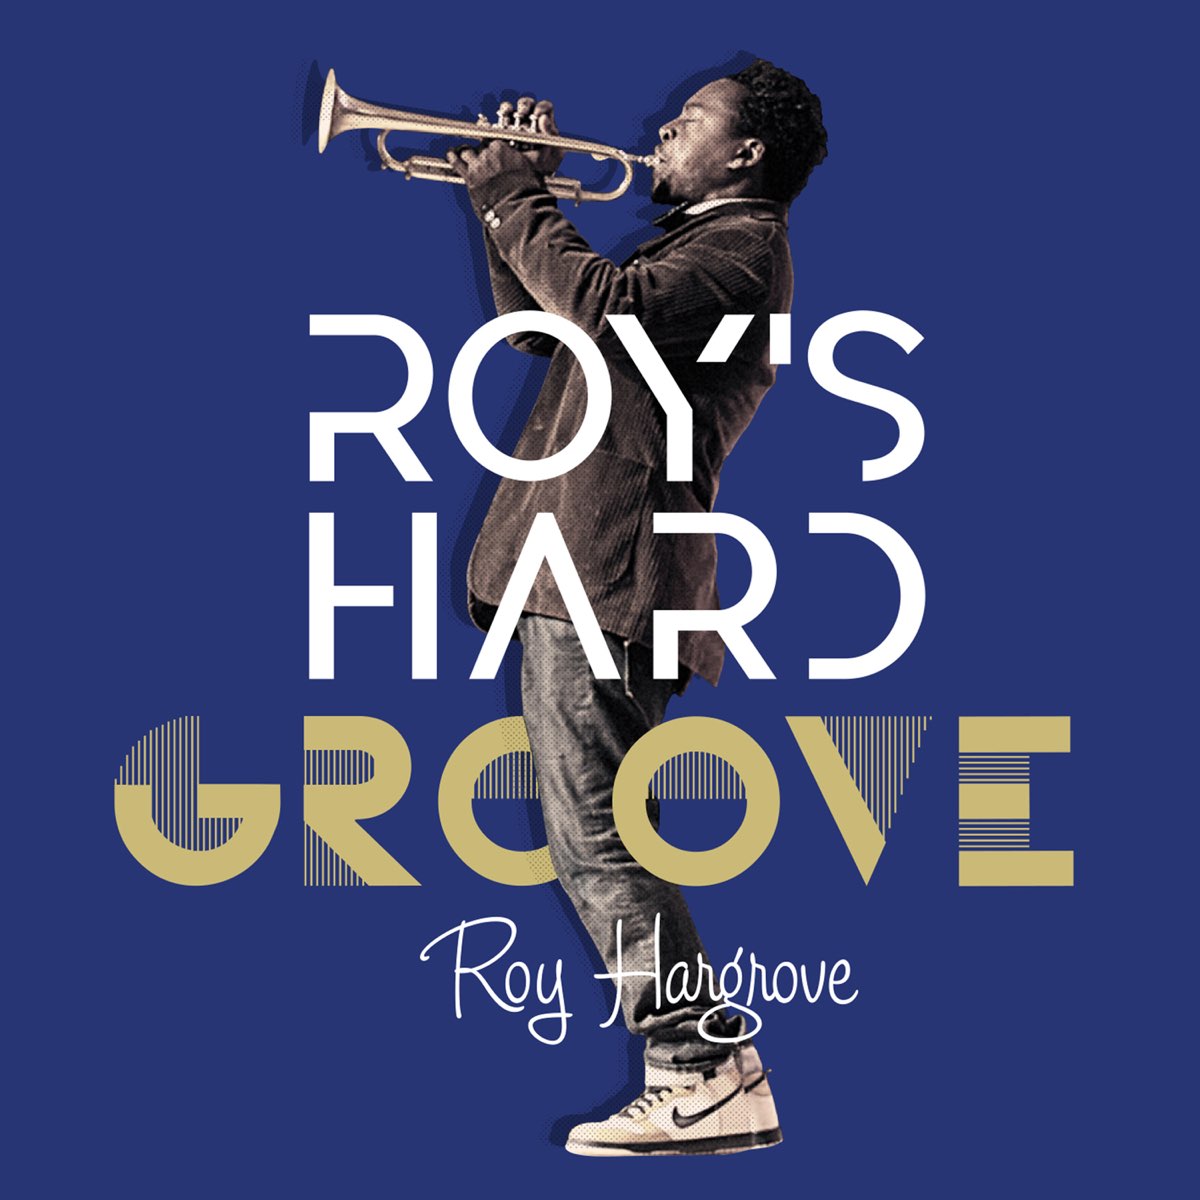 Roy's Hard Groove by Roy Hargrove on Apple Music